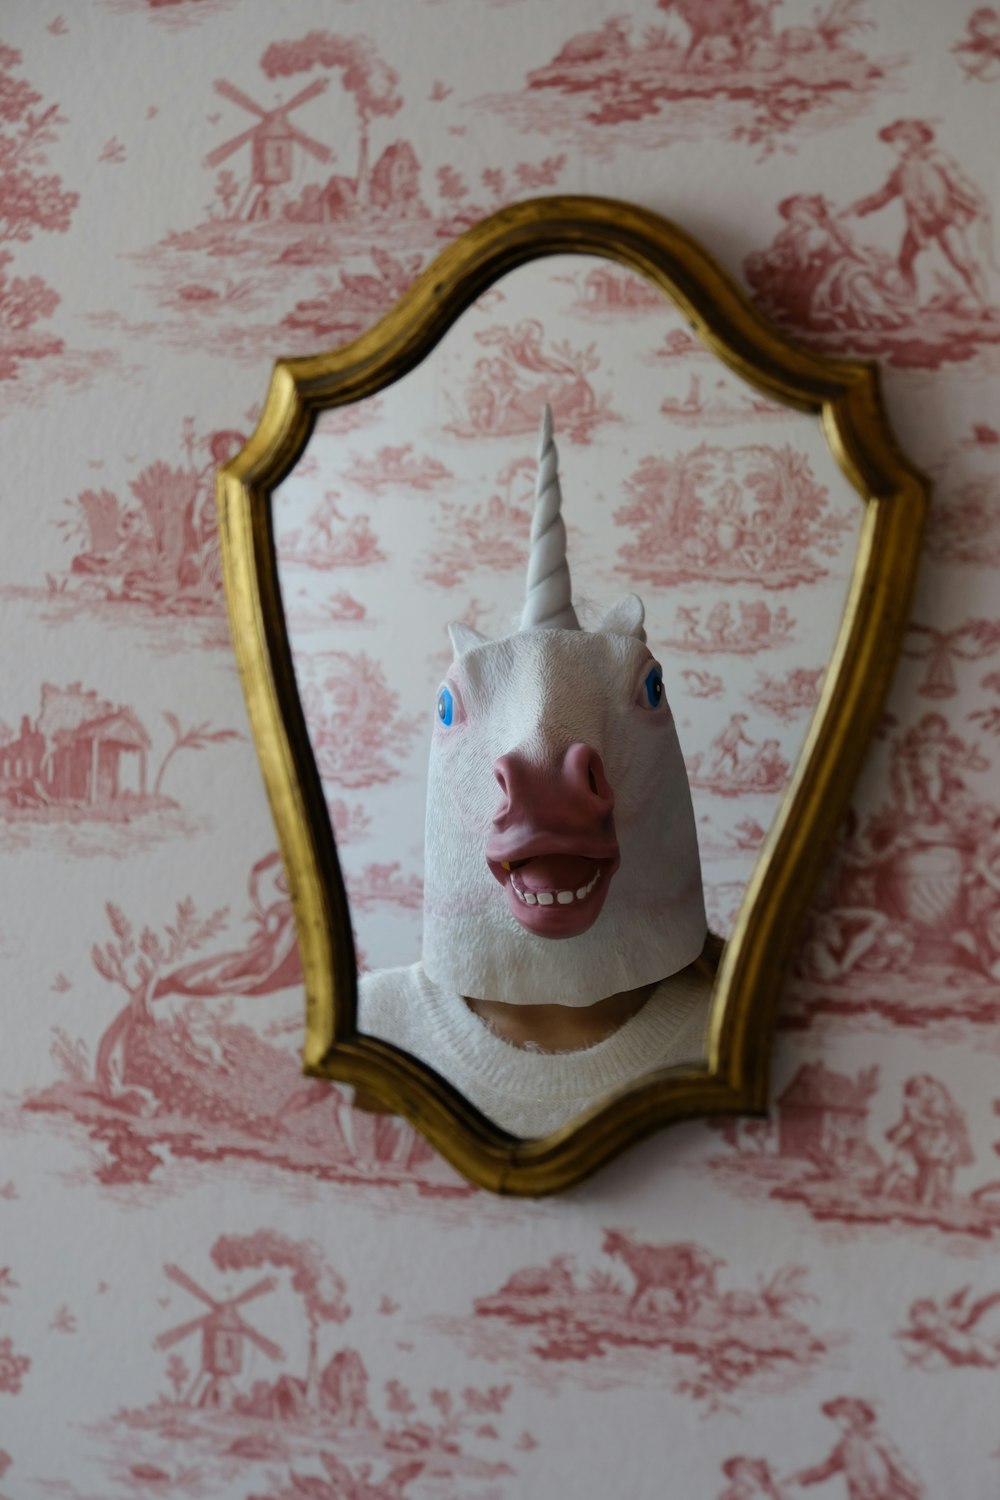 person with white unicorn mask stands in front of wall mirror